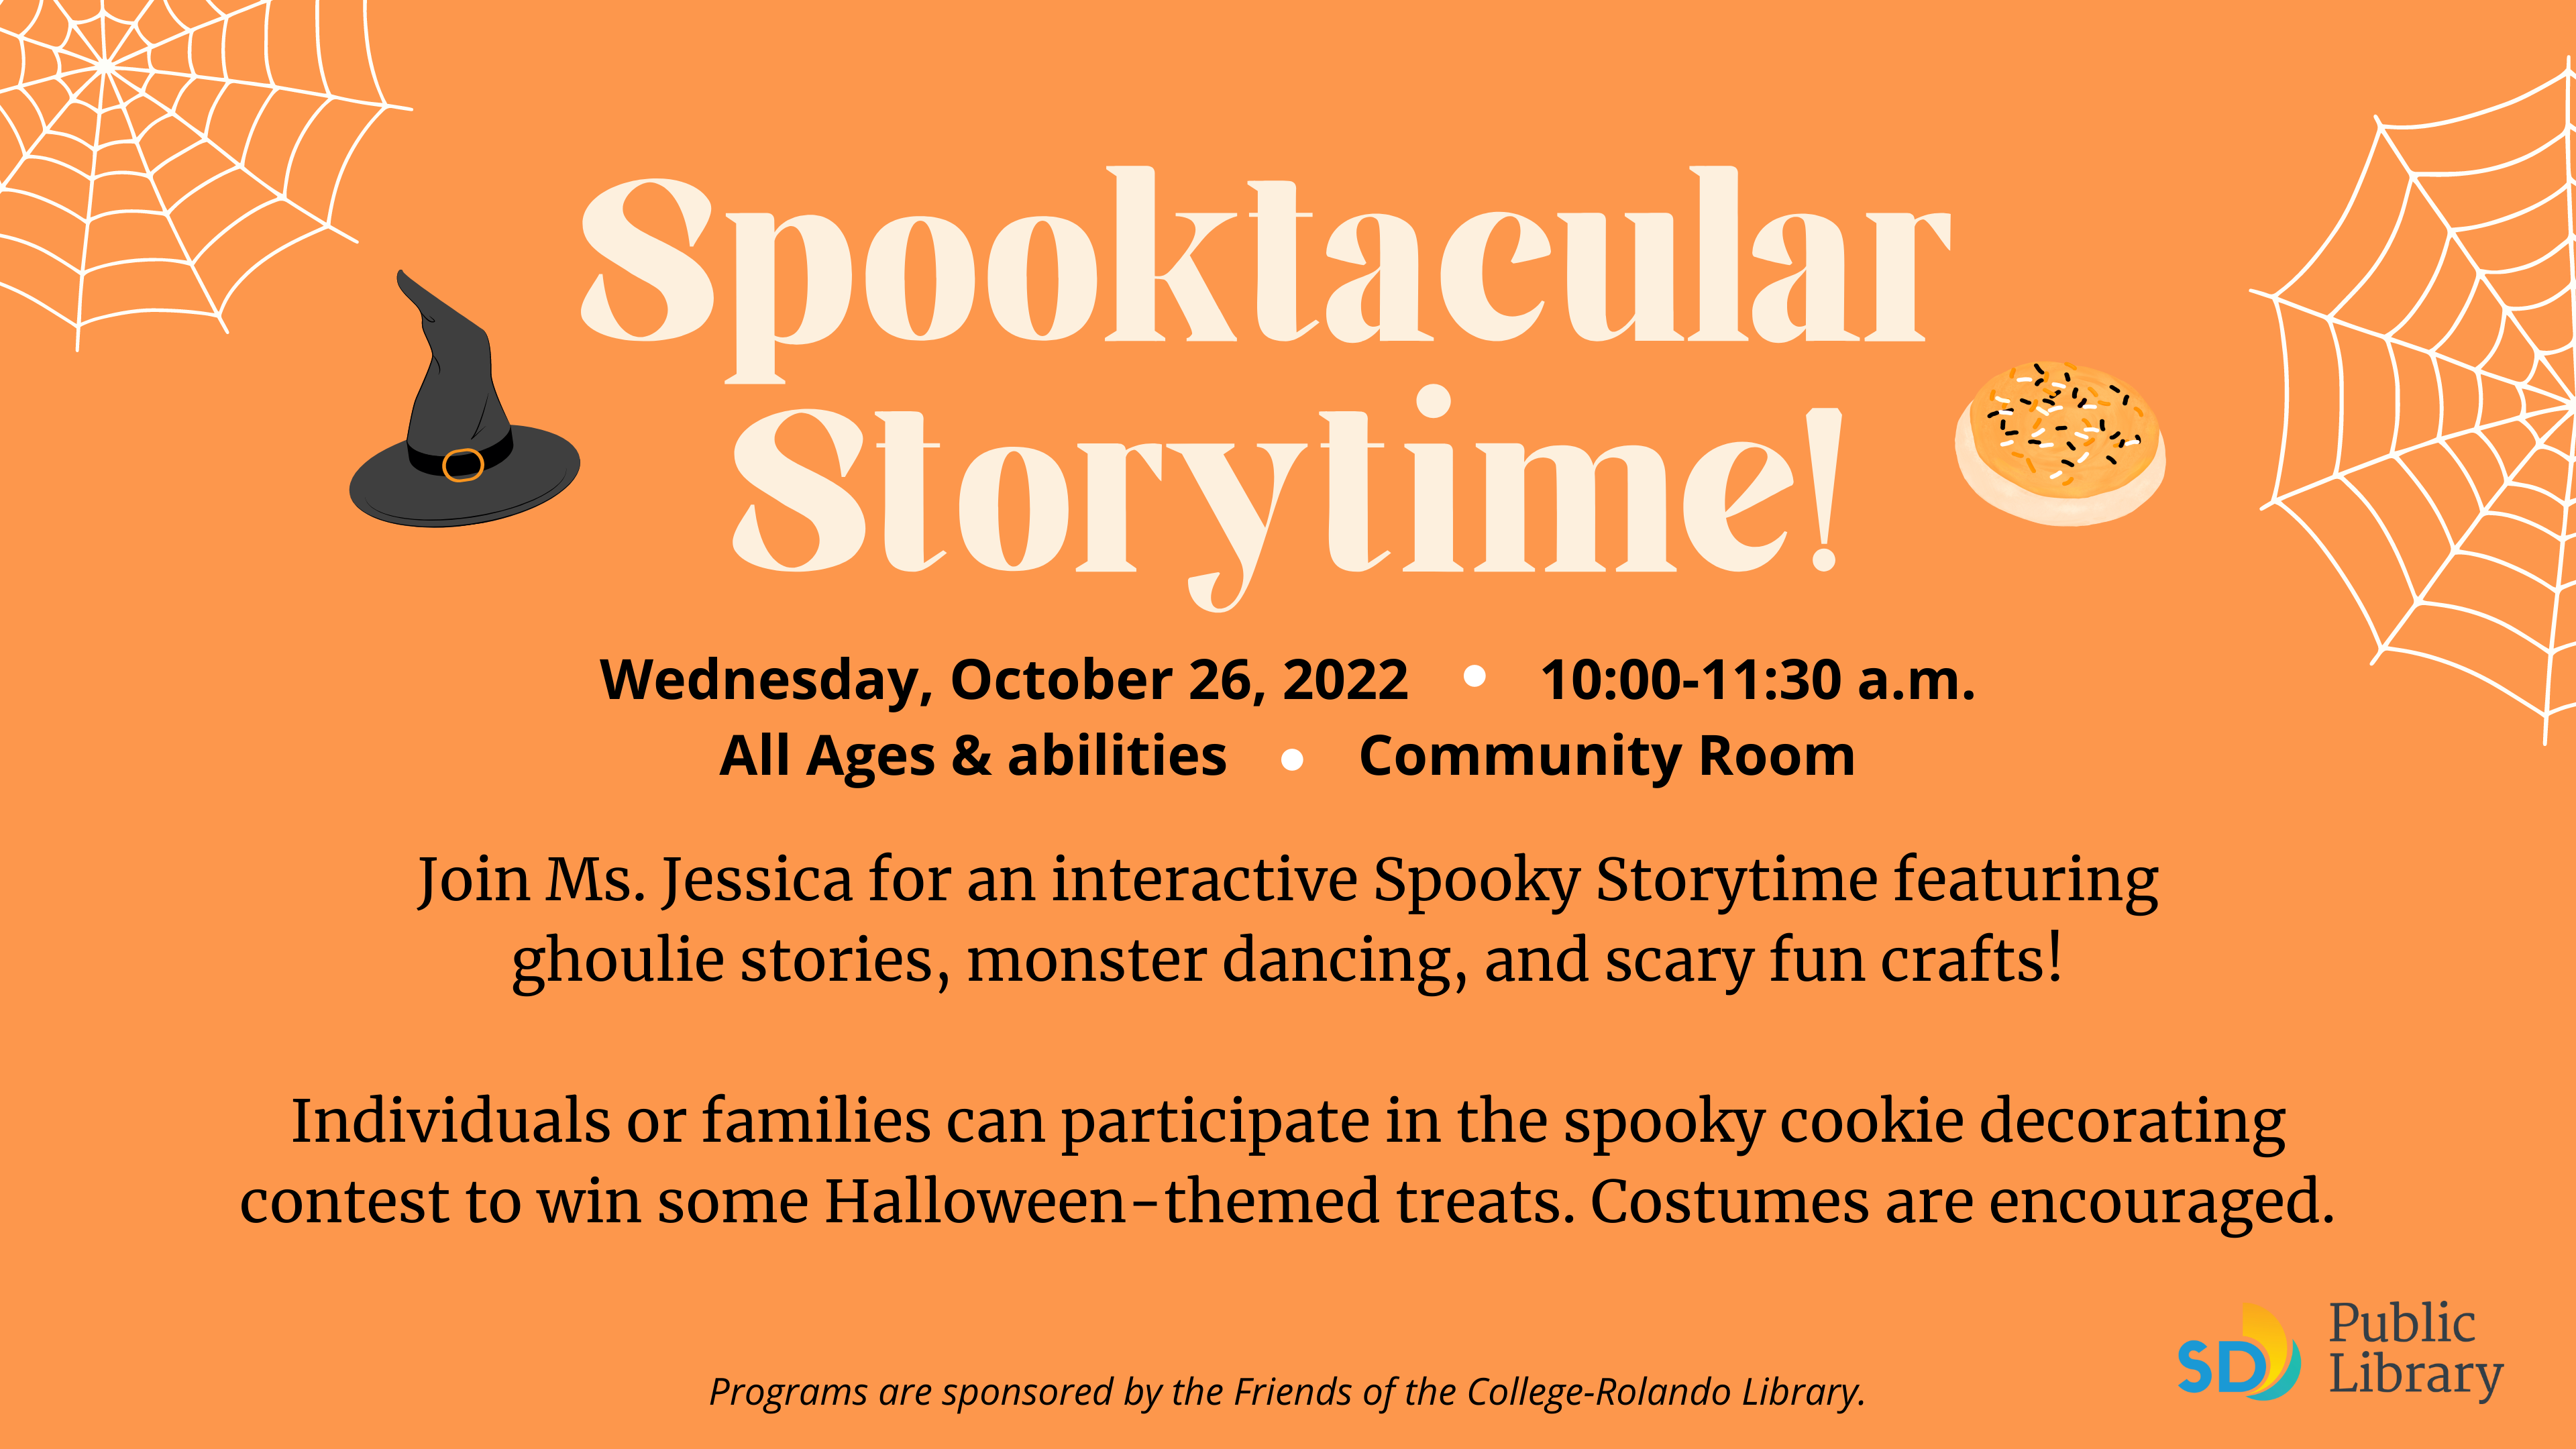 Spooktacular  Storytime! Programs are sponsored by the Friends of the College-Rolando Library. Wednesday, October 26, 2022         10:00-11:30 a.m. All Ages & abilities         Community Room · Join Ms. Jessica for an interactive Spooky Storytime featuring ghoulie stories, monster dancing, and scary fun crafts!  Individuals or families can participate in the spooky cookie decorating contest to win some Halloween-themed treats. Costumes are encouraged. ·